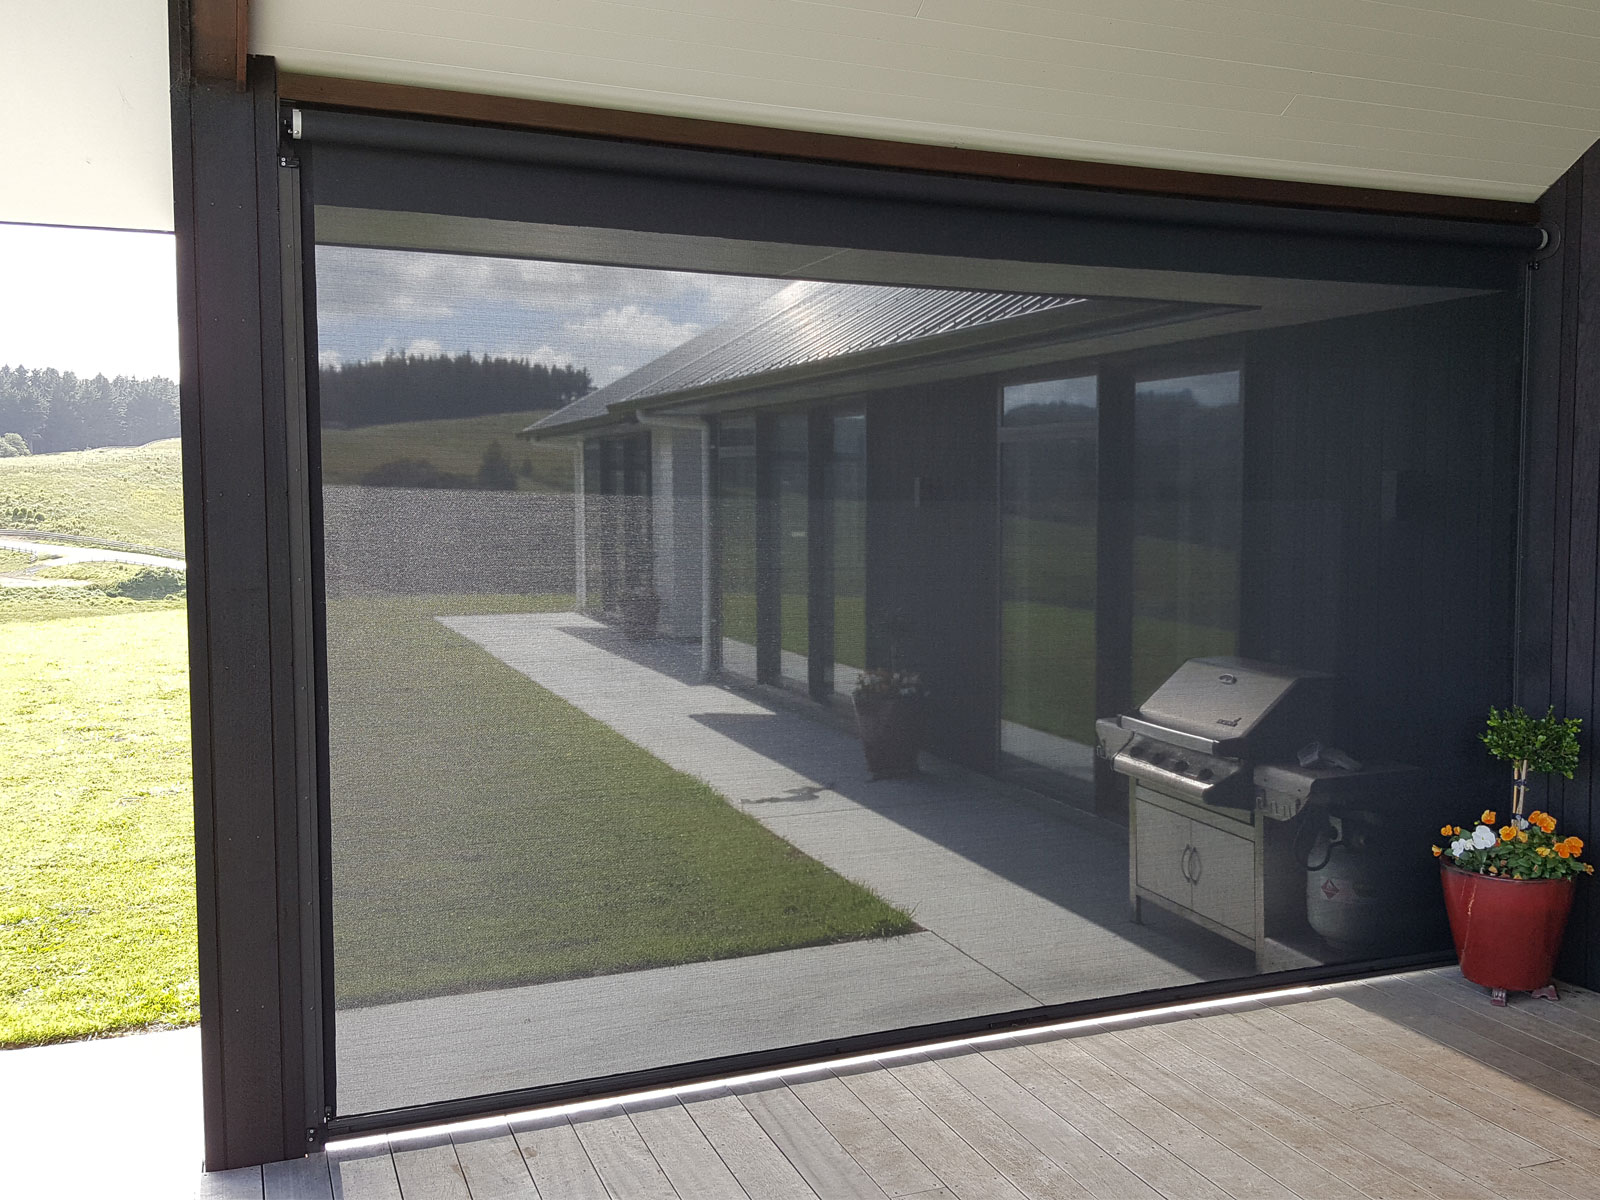 Outdoor blinds provide protection from wind and sun - closed